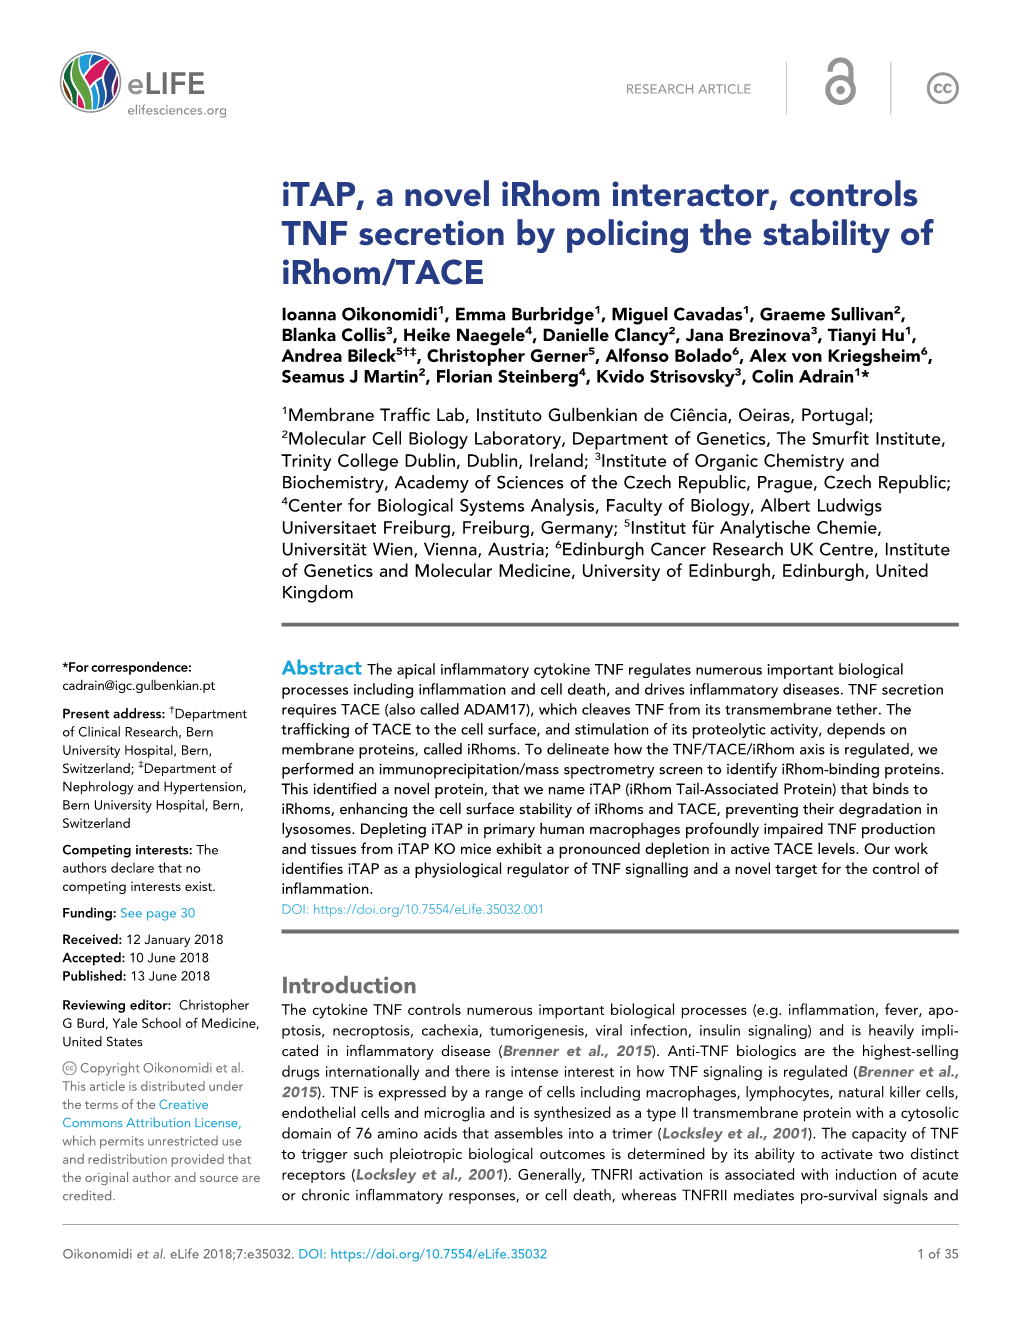 Itap, a Novel Irhom Interactor, Controls TNF Secretion by Policing